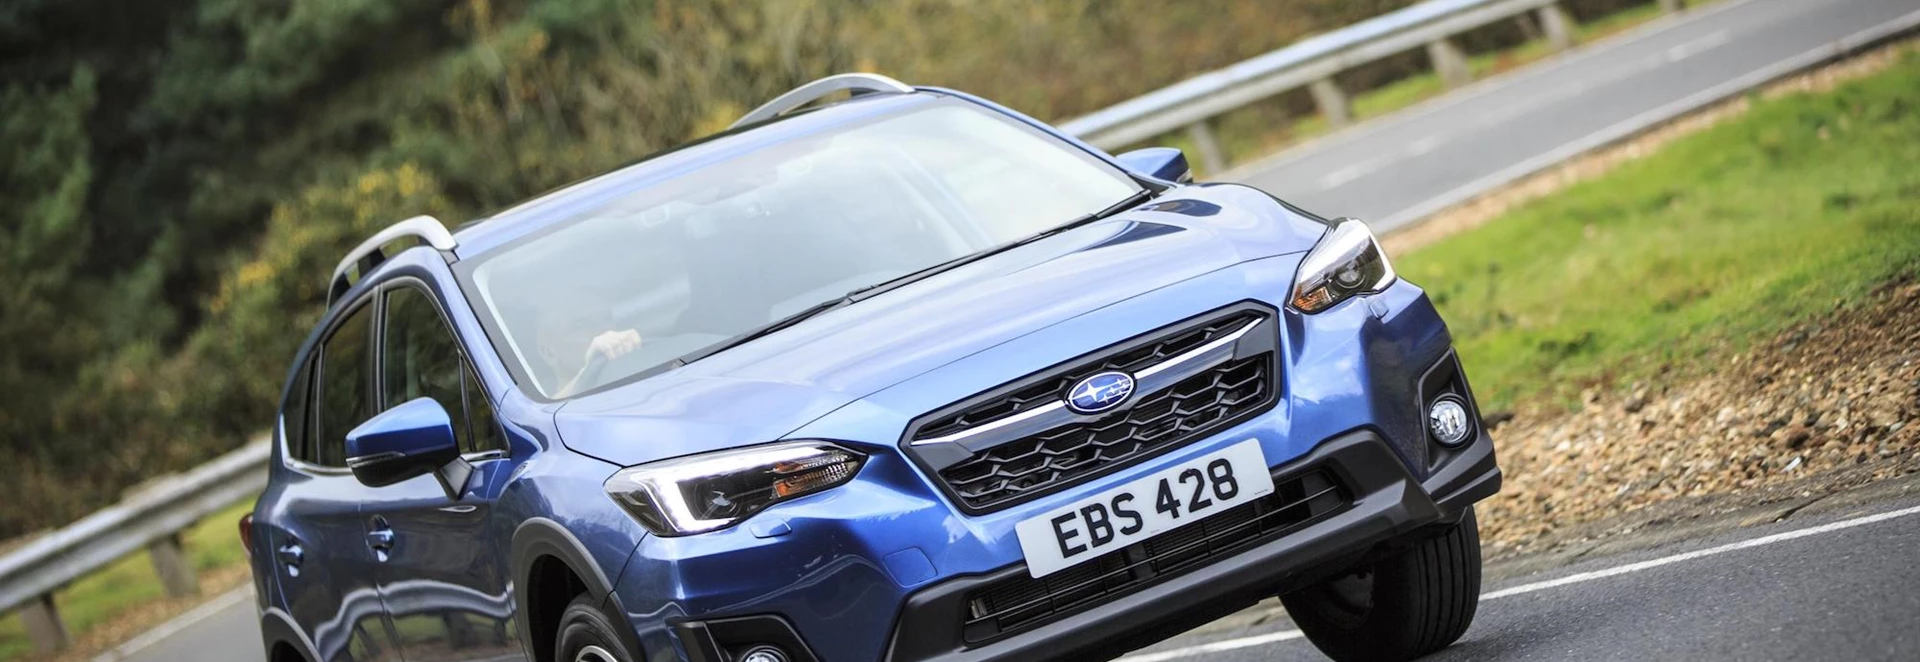 New Subaru XV commended for safety in What Car? Awards